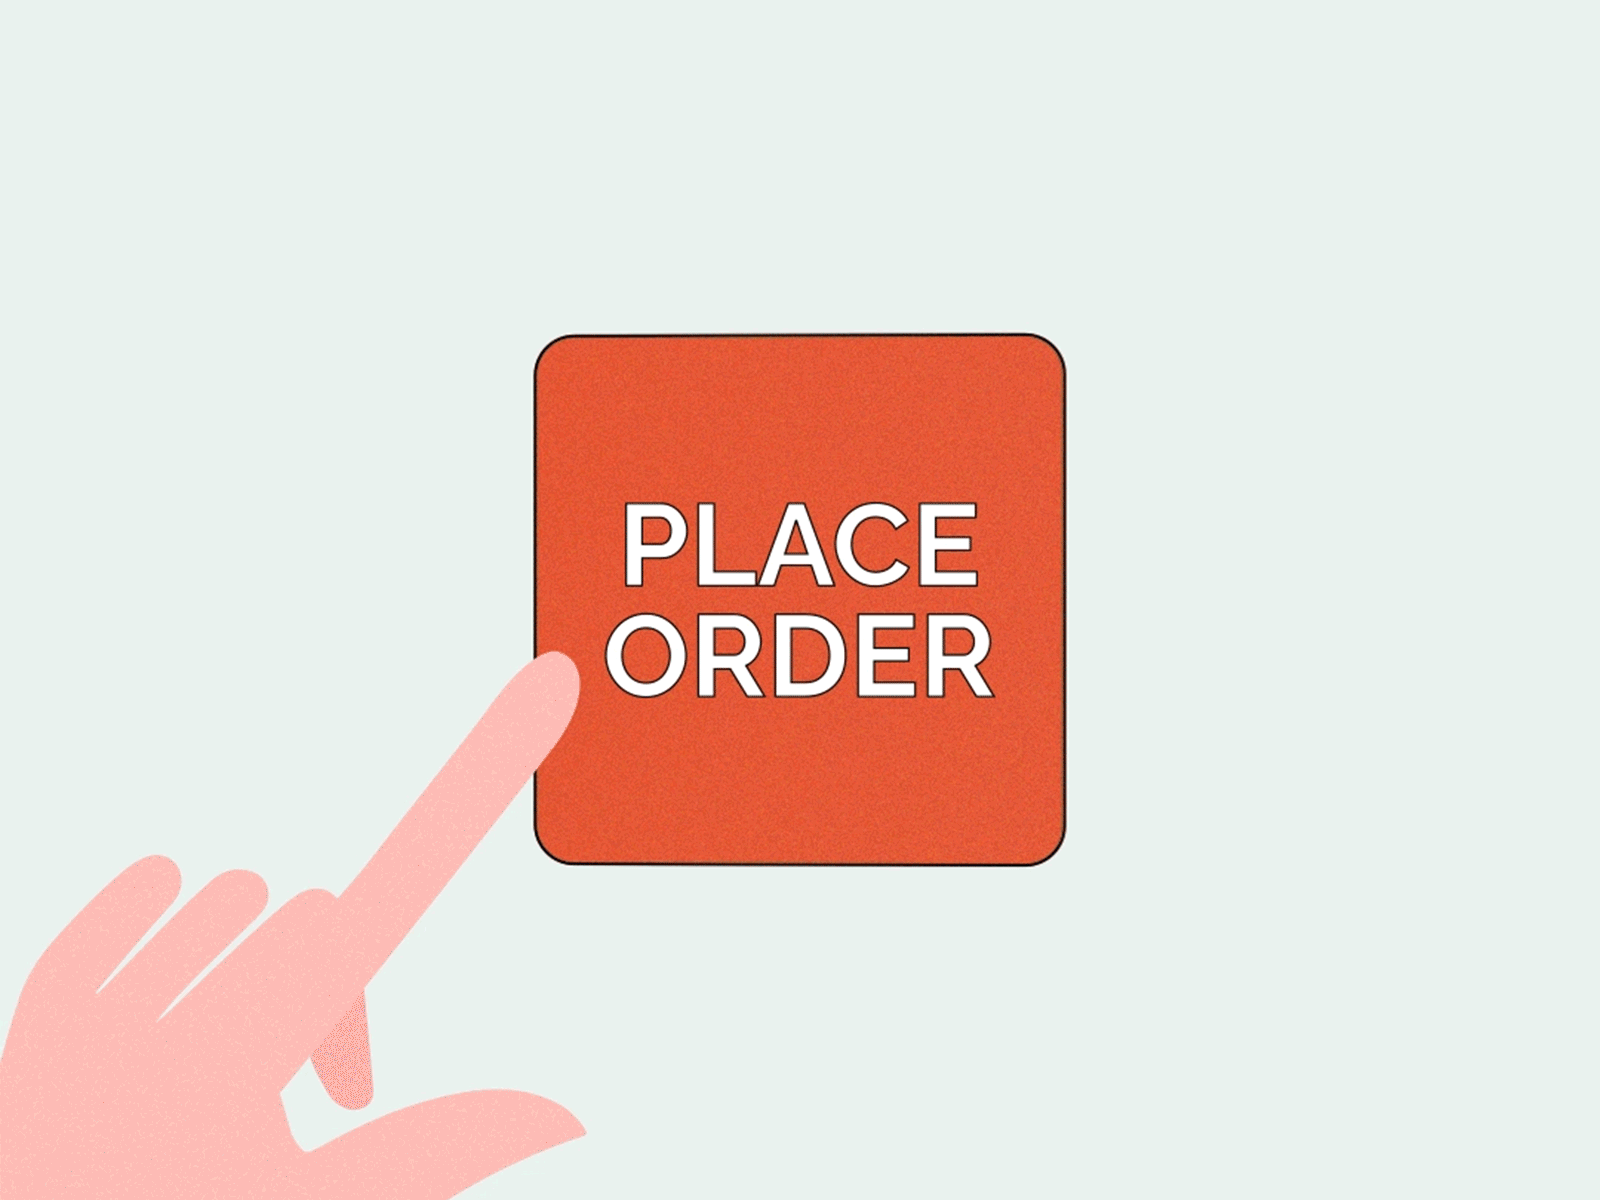 Place order button